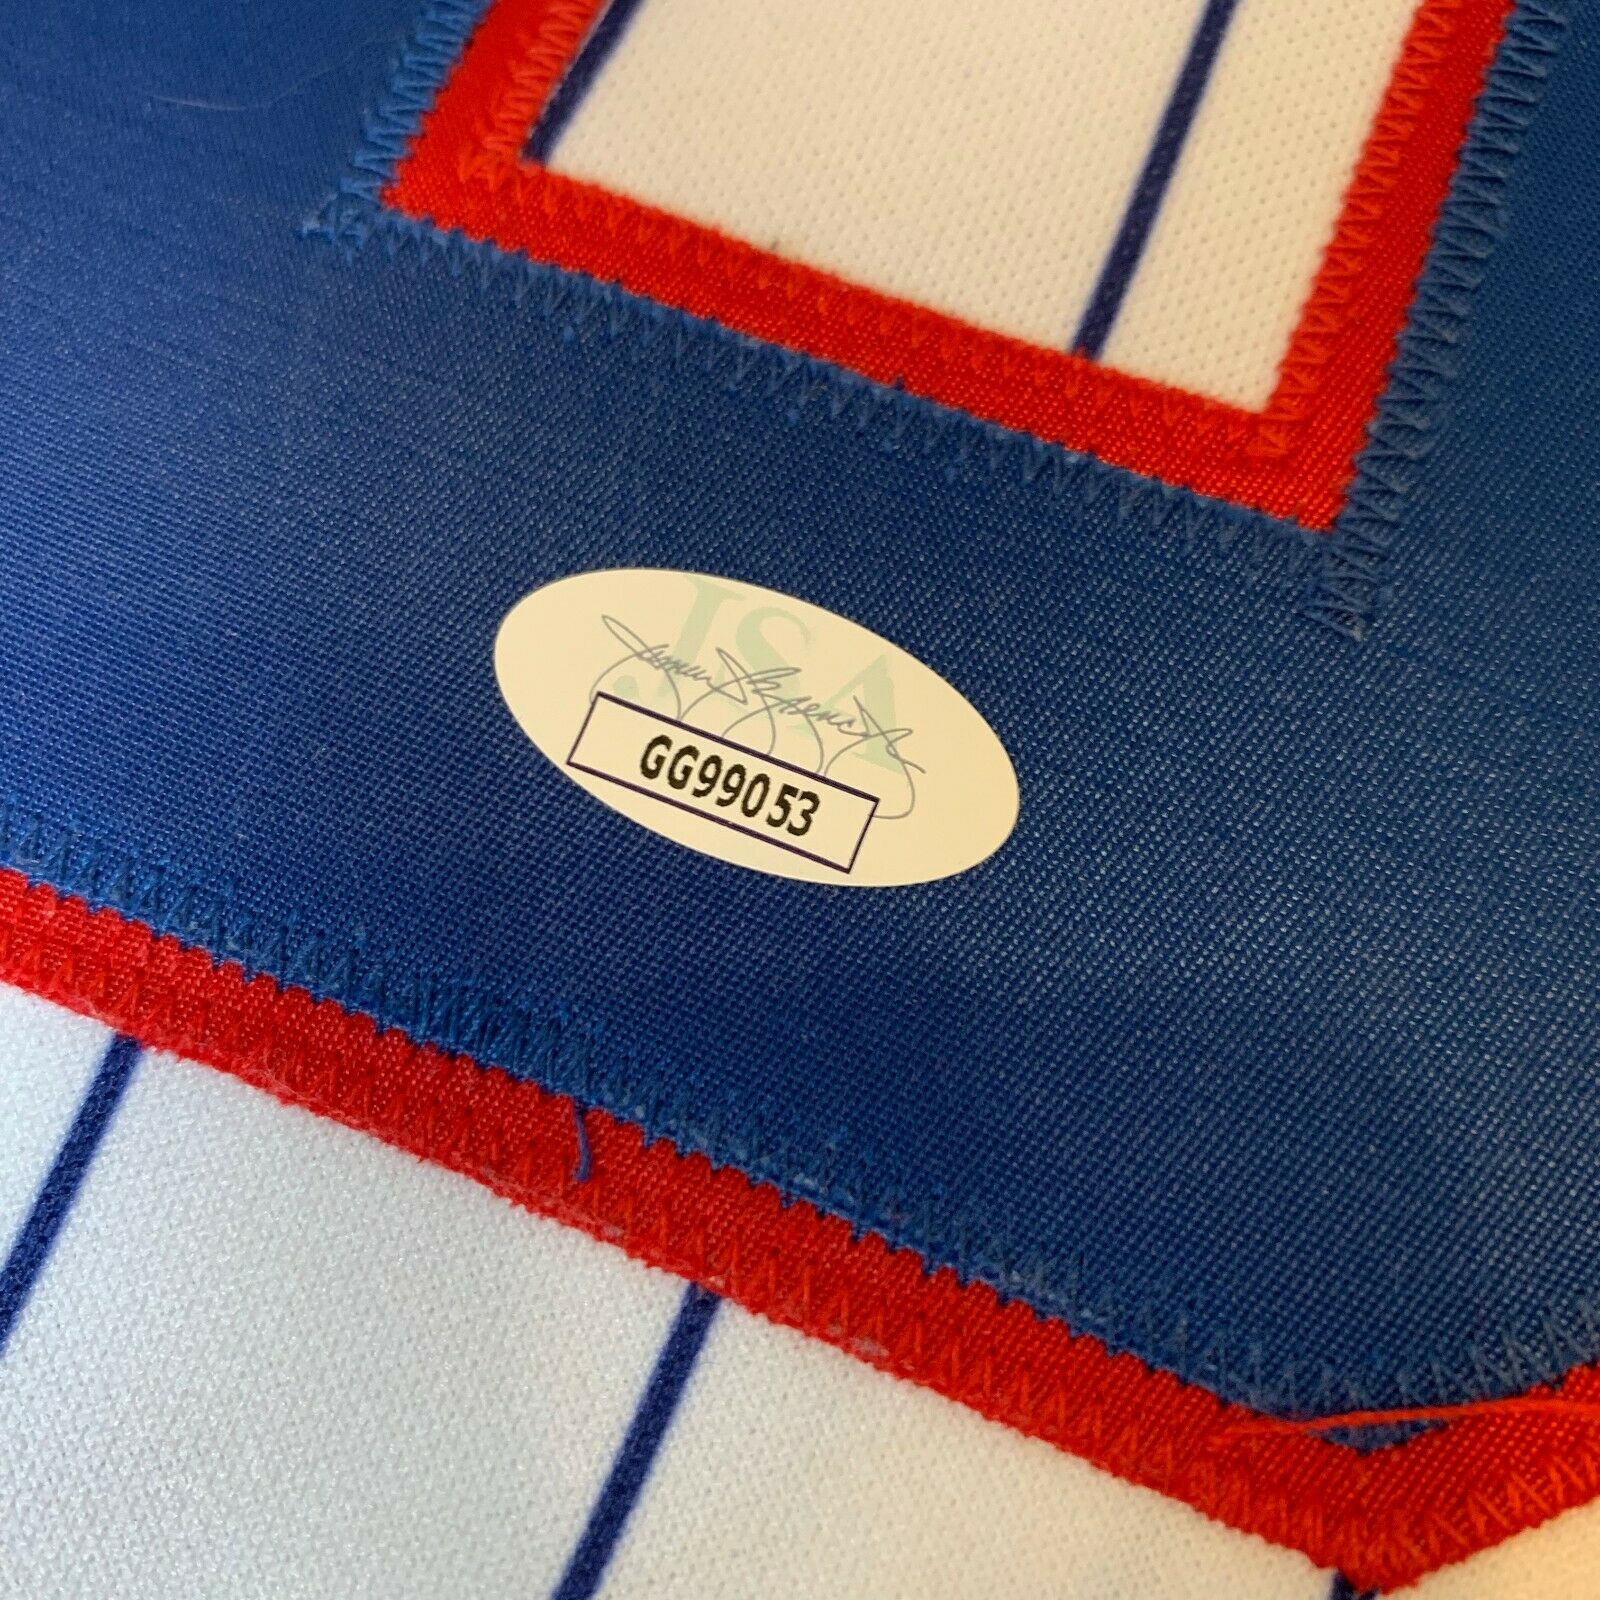 Larry Walker autographed Jersey (Montreal Expos) with stitched